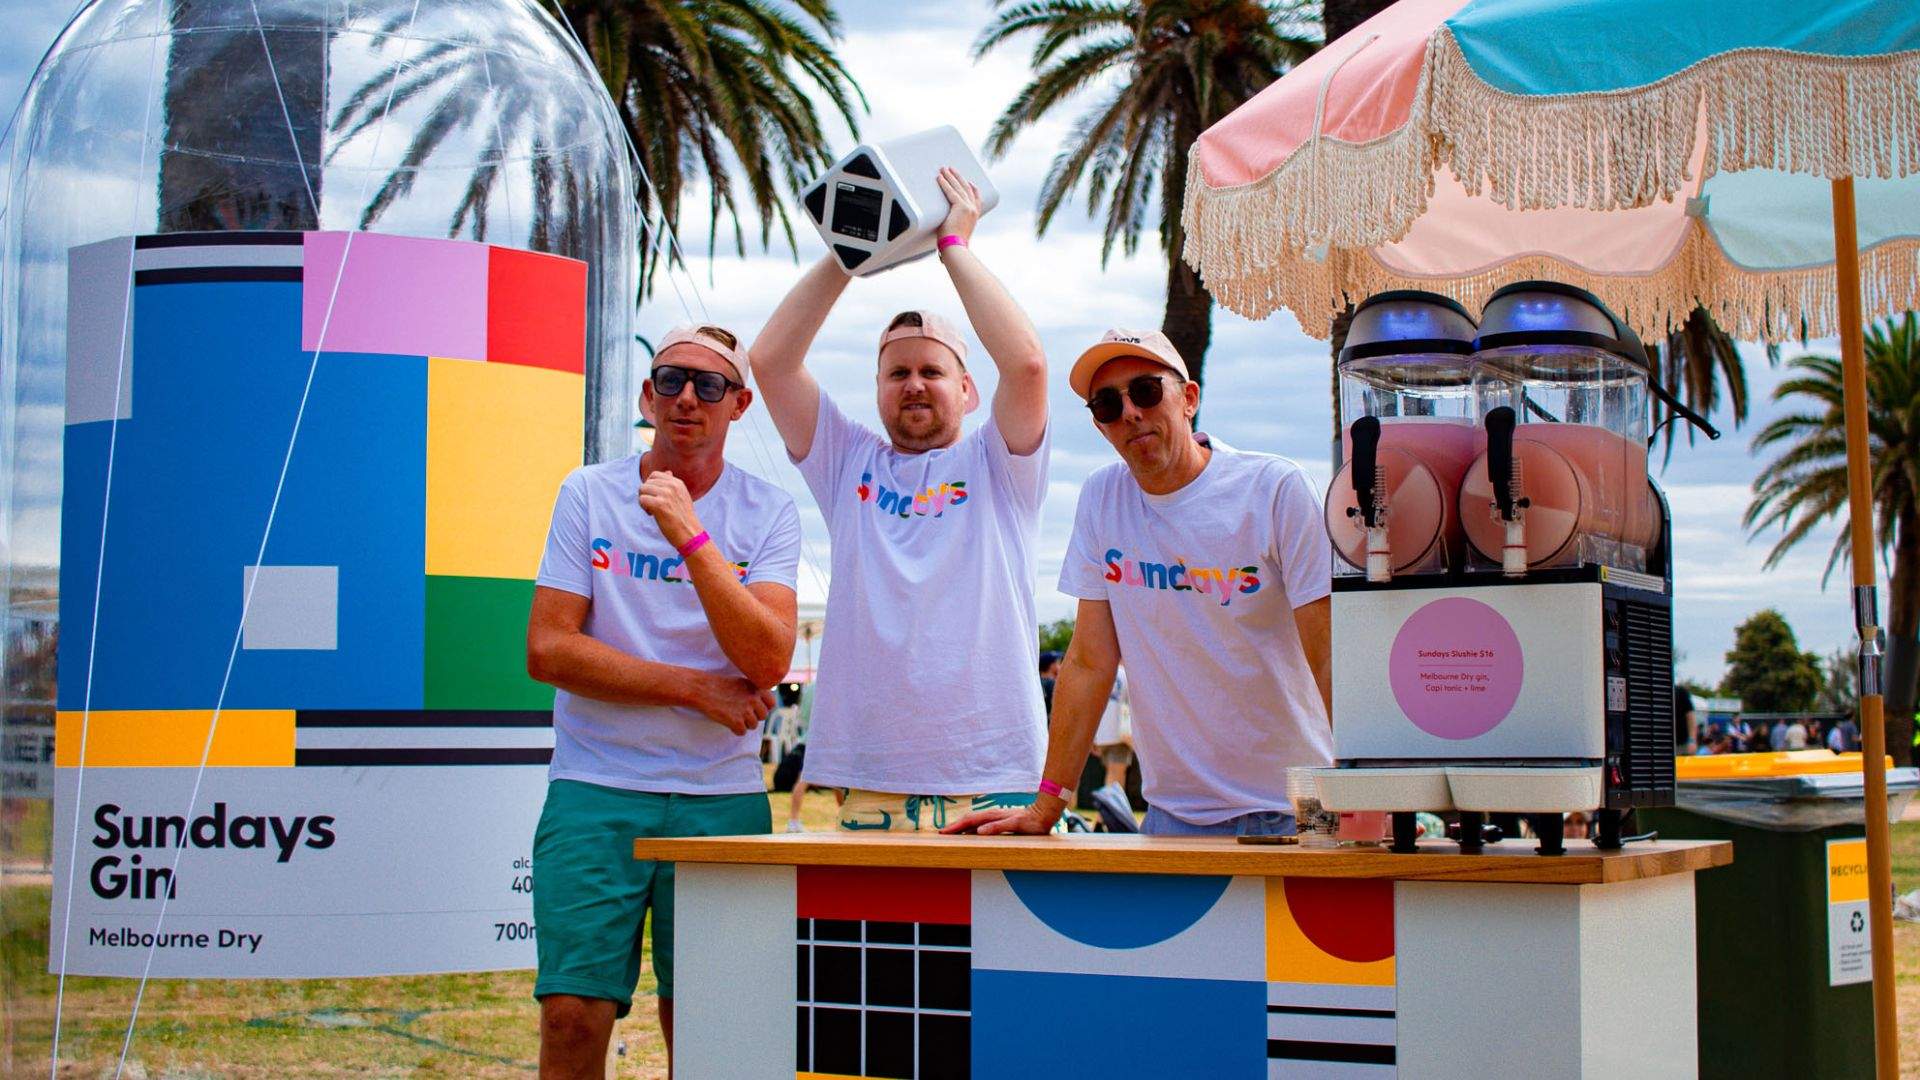 Coming Soon: BeerFest Is Sydney's New Drinks Festival That's Pouring Quality Tipples From Aussie Producers